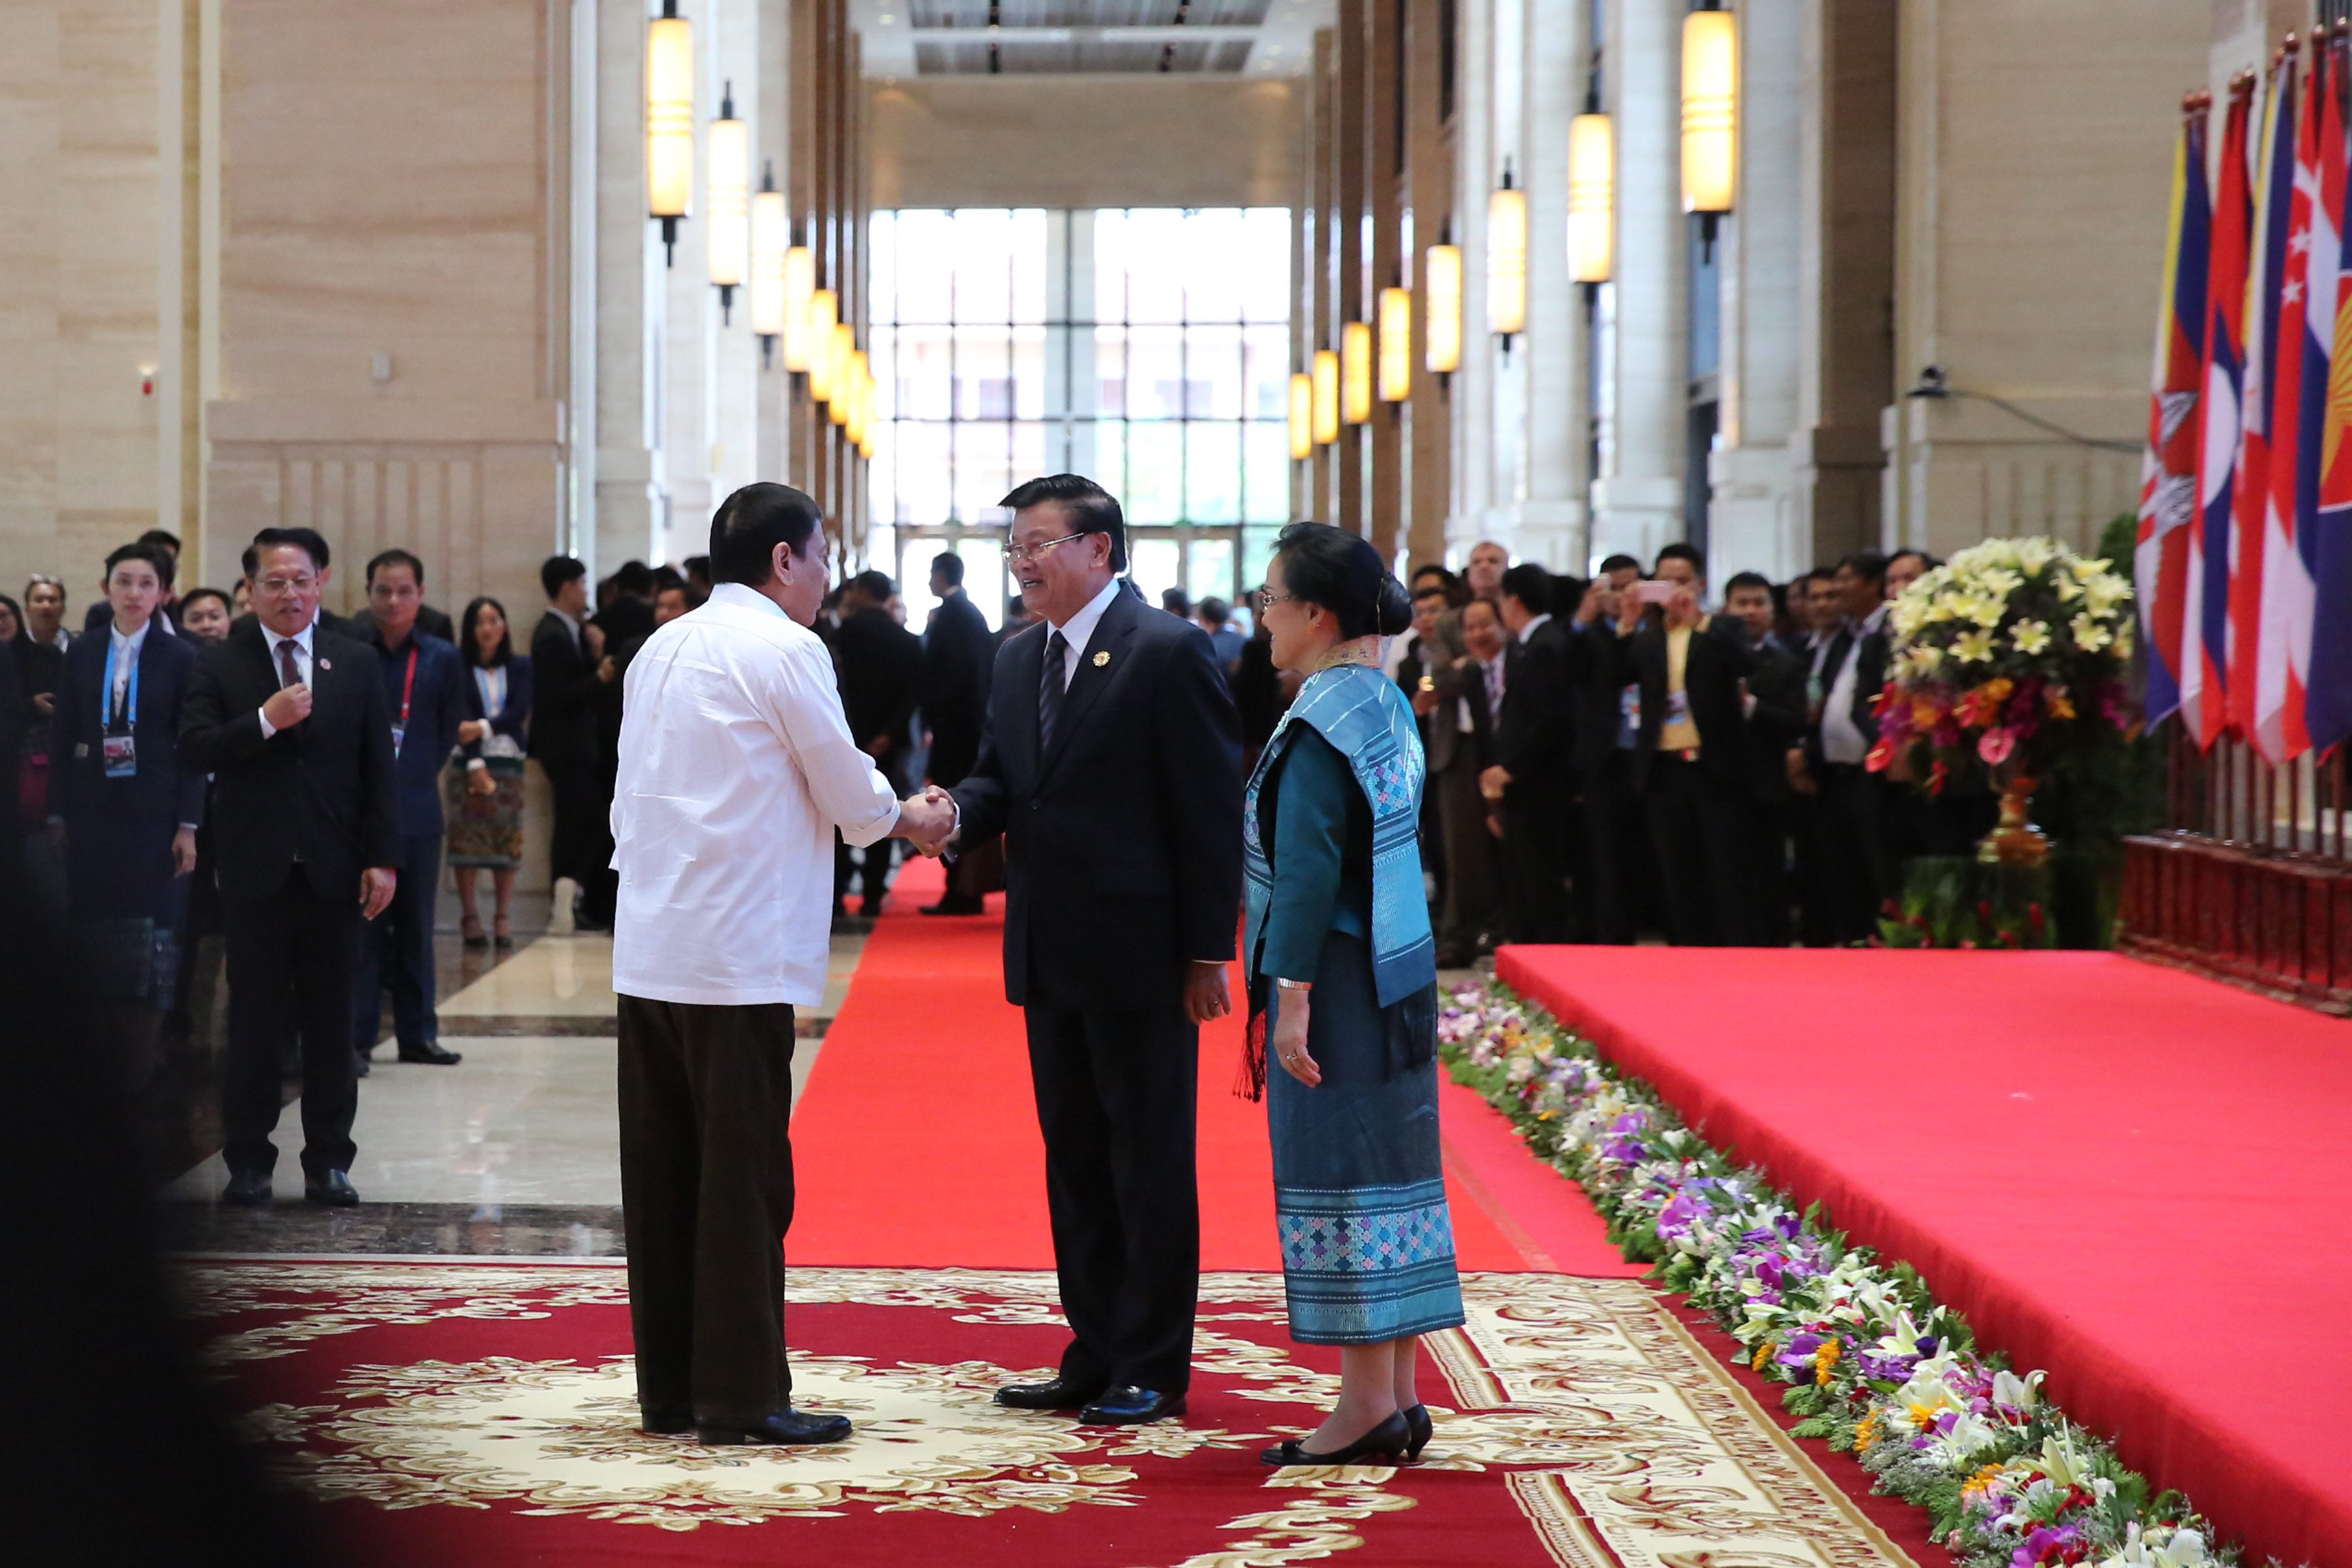 HOST TO FUTURE HOST. President Duterte shakes hands with Laos Prime Minister Thongloun Sisoulith. All photos from PCOO 